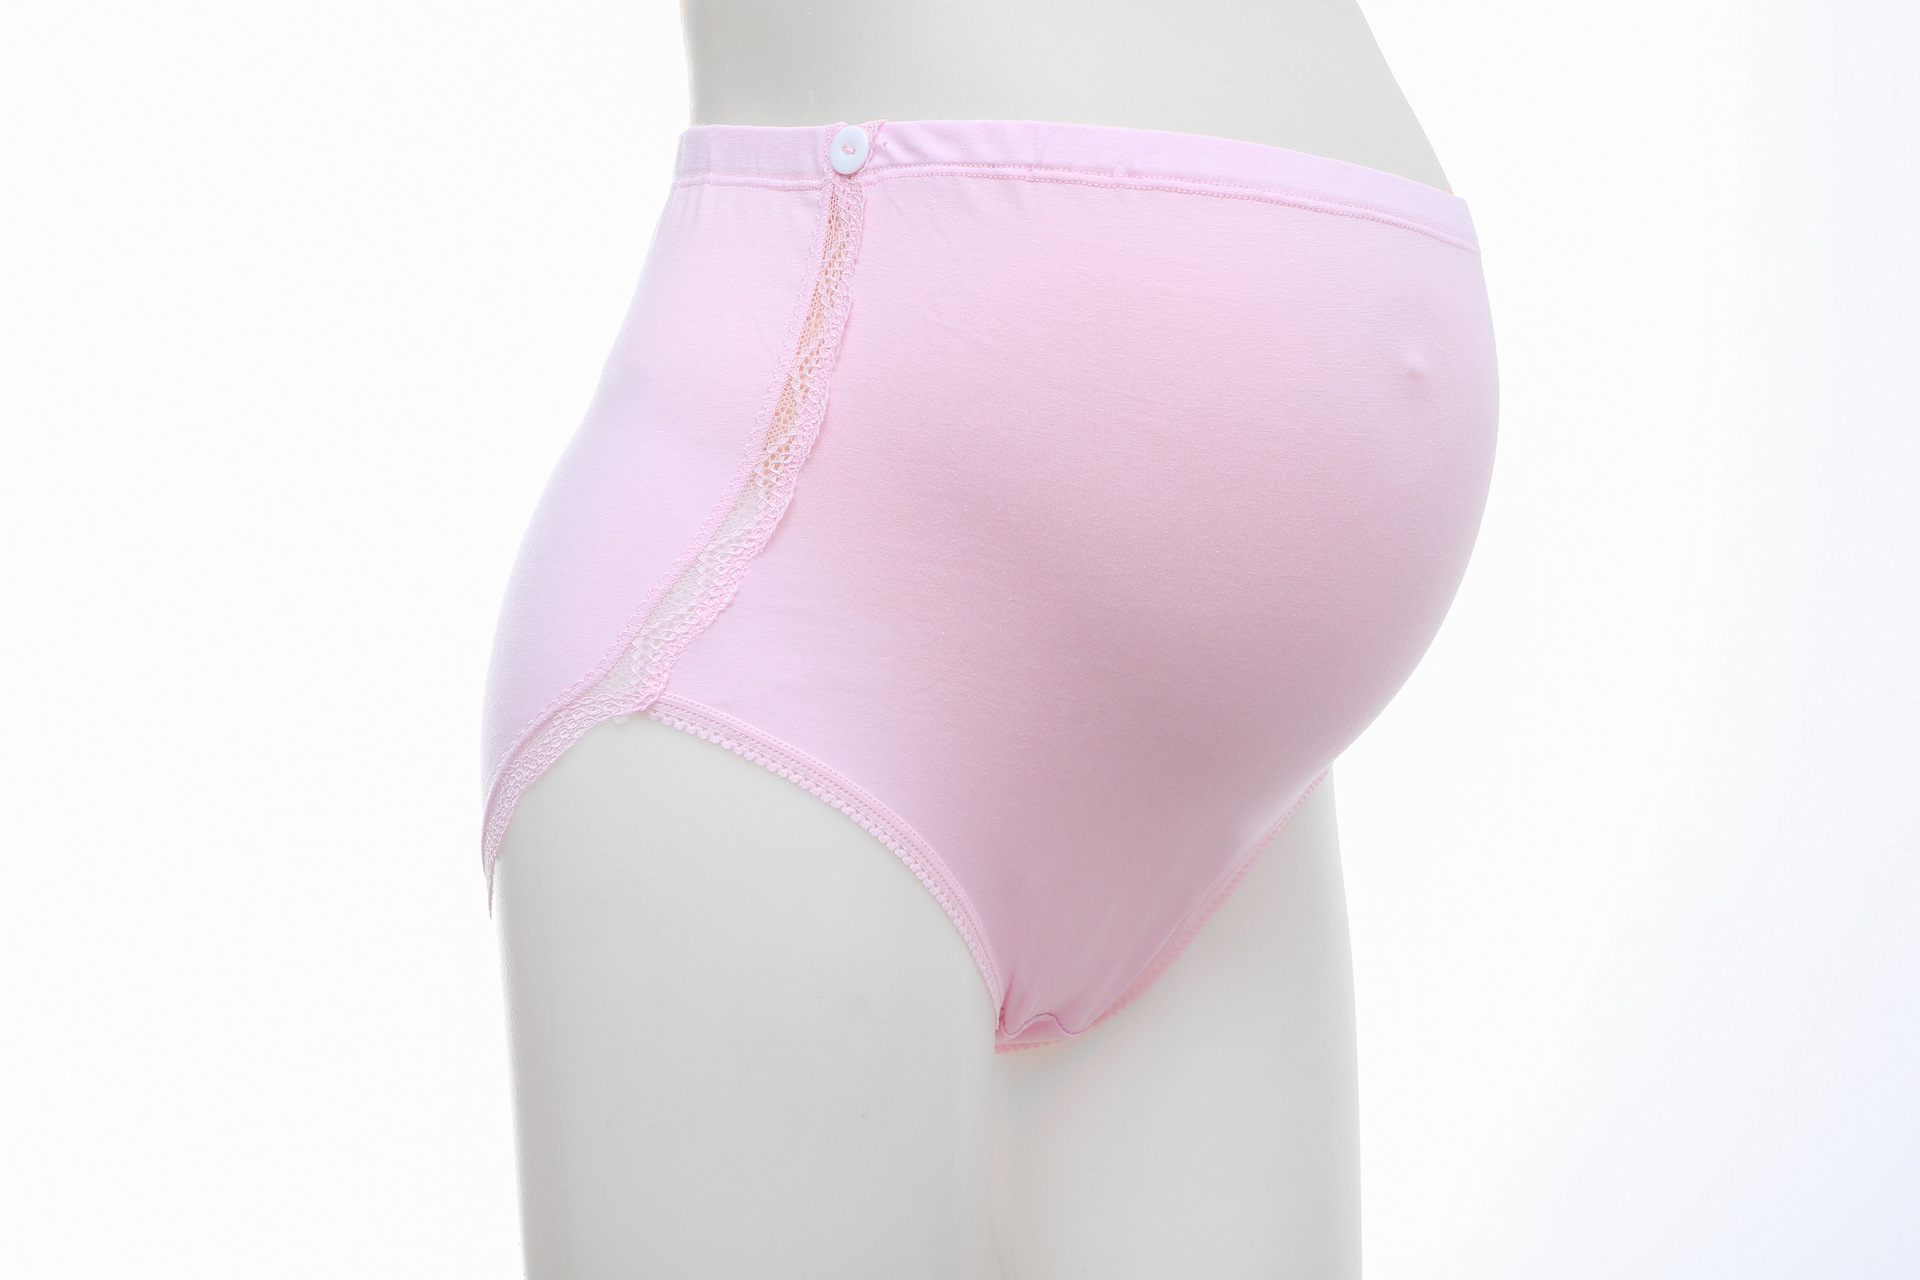 Adjustable maternity panty comfy pregnancy wear high waist cotton panty for pregnant women